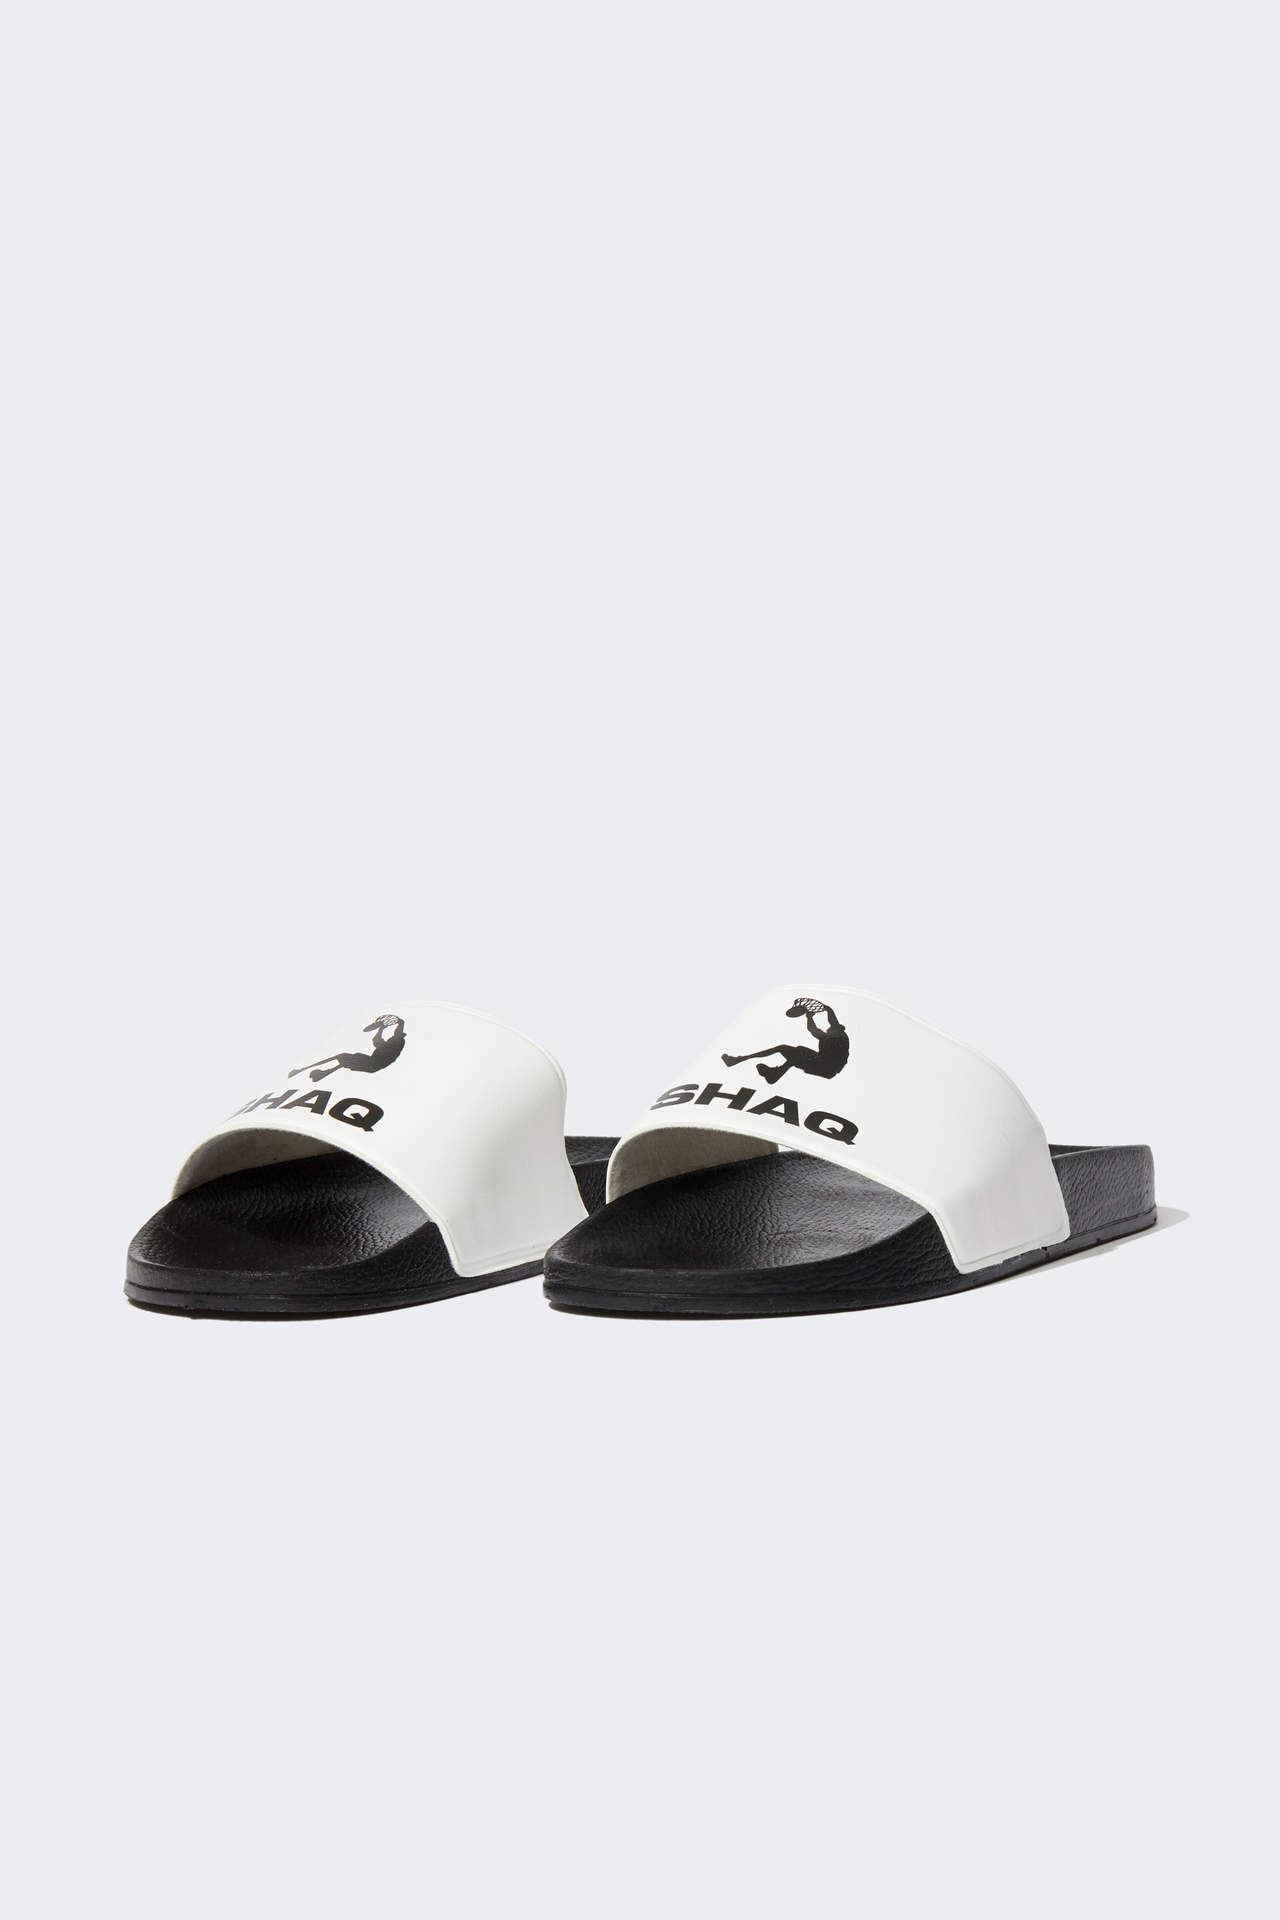 DEFACTO Men's Slippers Shaquille O'Neal